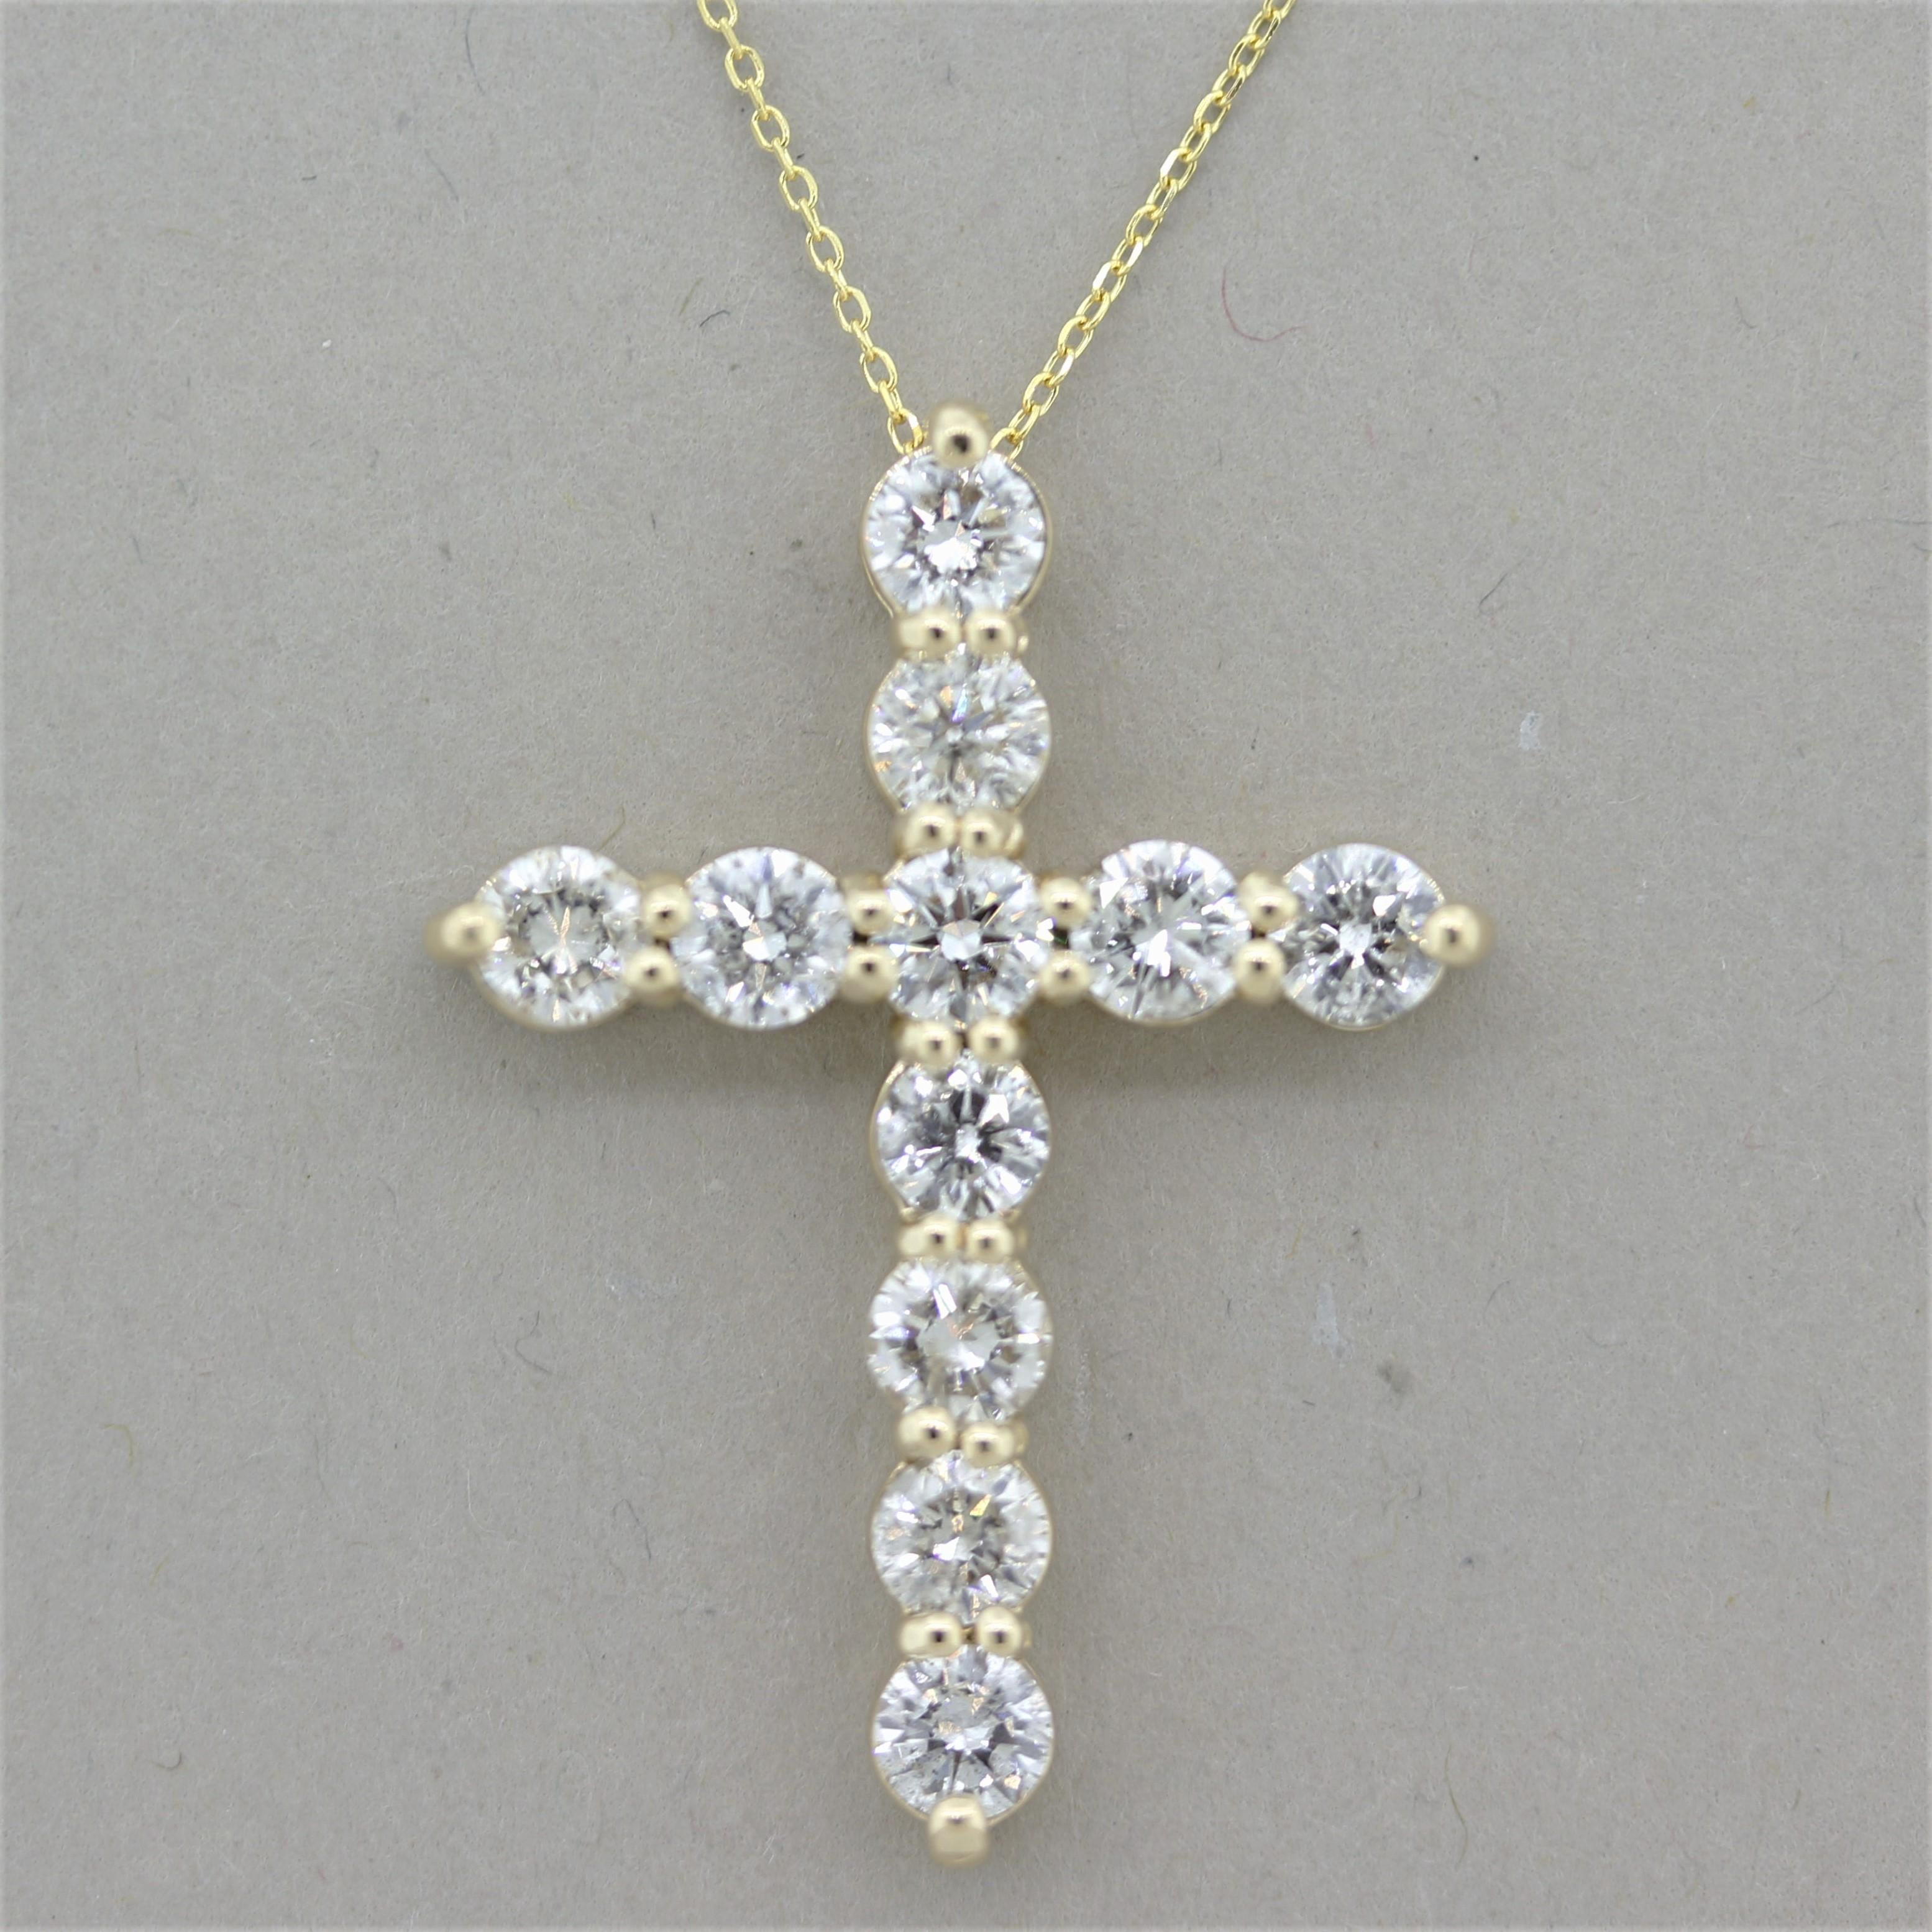 A classic cross pendant featuring 11 large and fine round brilliant-cut diamonds weighing a total of 2.37 carats. Set in 14k yellow gold and comes with a fine yellow gold chain with an extra bail allowing it to be worn at 16 or 18 inches.

Cross